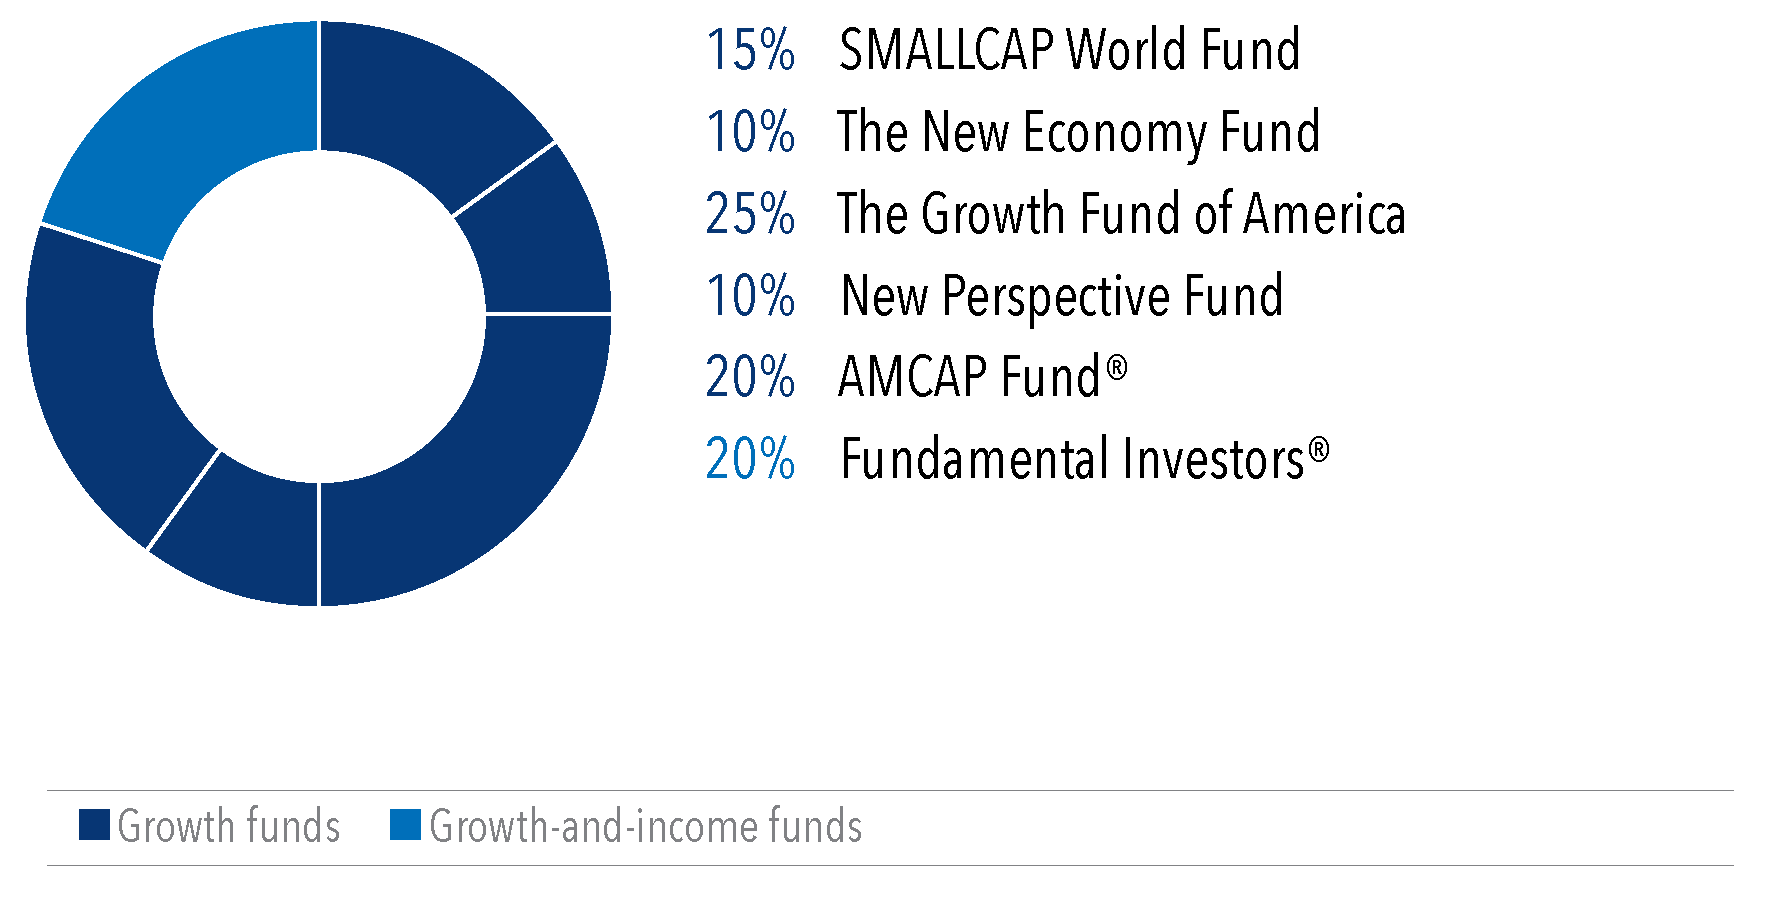 Donut chart displays a target allocation of 15% to SMALLCAP World Fund, 10% to The New Economy Fund, 25% to The Growth Fund of America, 10% to New Perspective Fund, 20% to AMCAP Fund, 20% to Fundamental Investors.